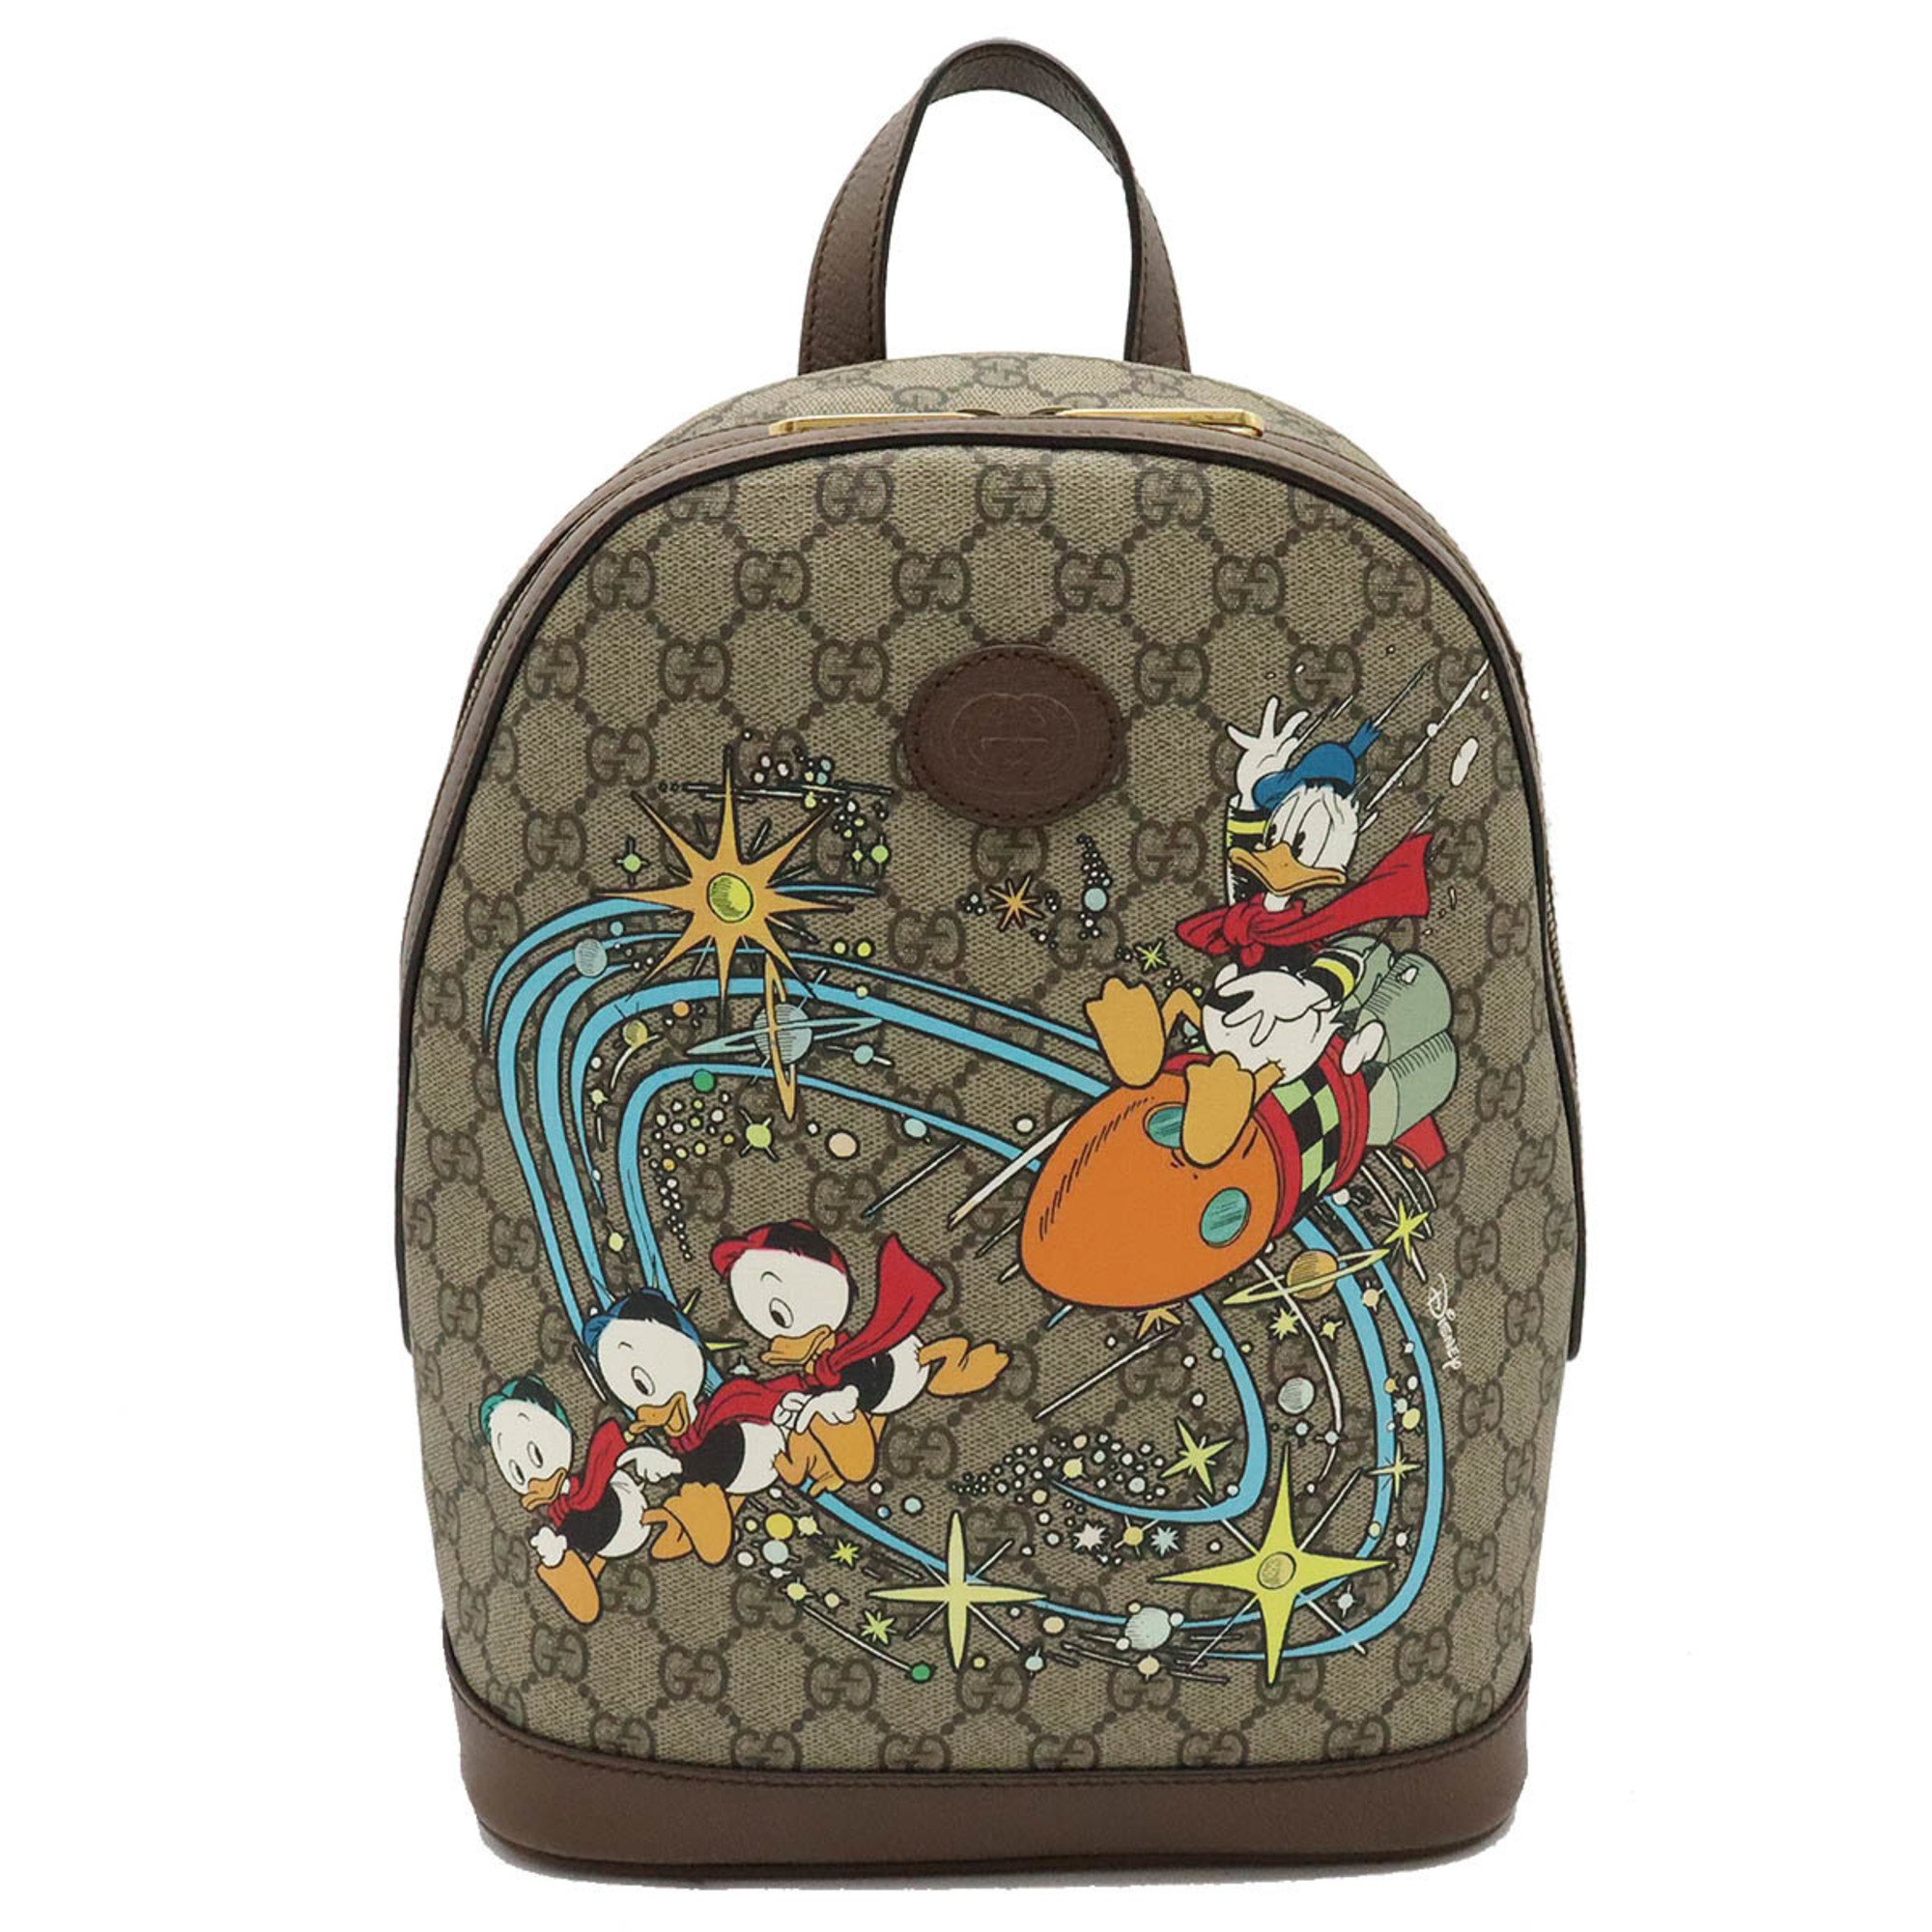 GUCCI GG Supreme Disney collaboration Donald Duck backpack PVC leather khaki beige brown 552884